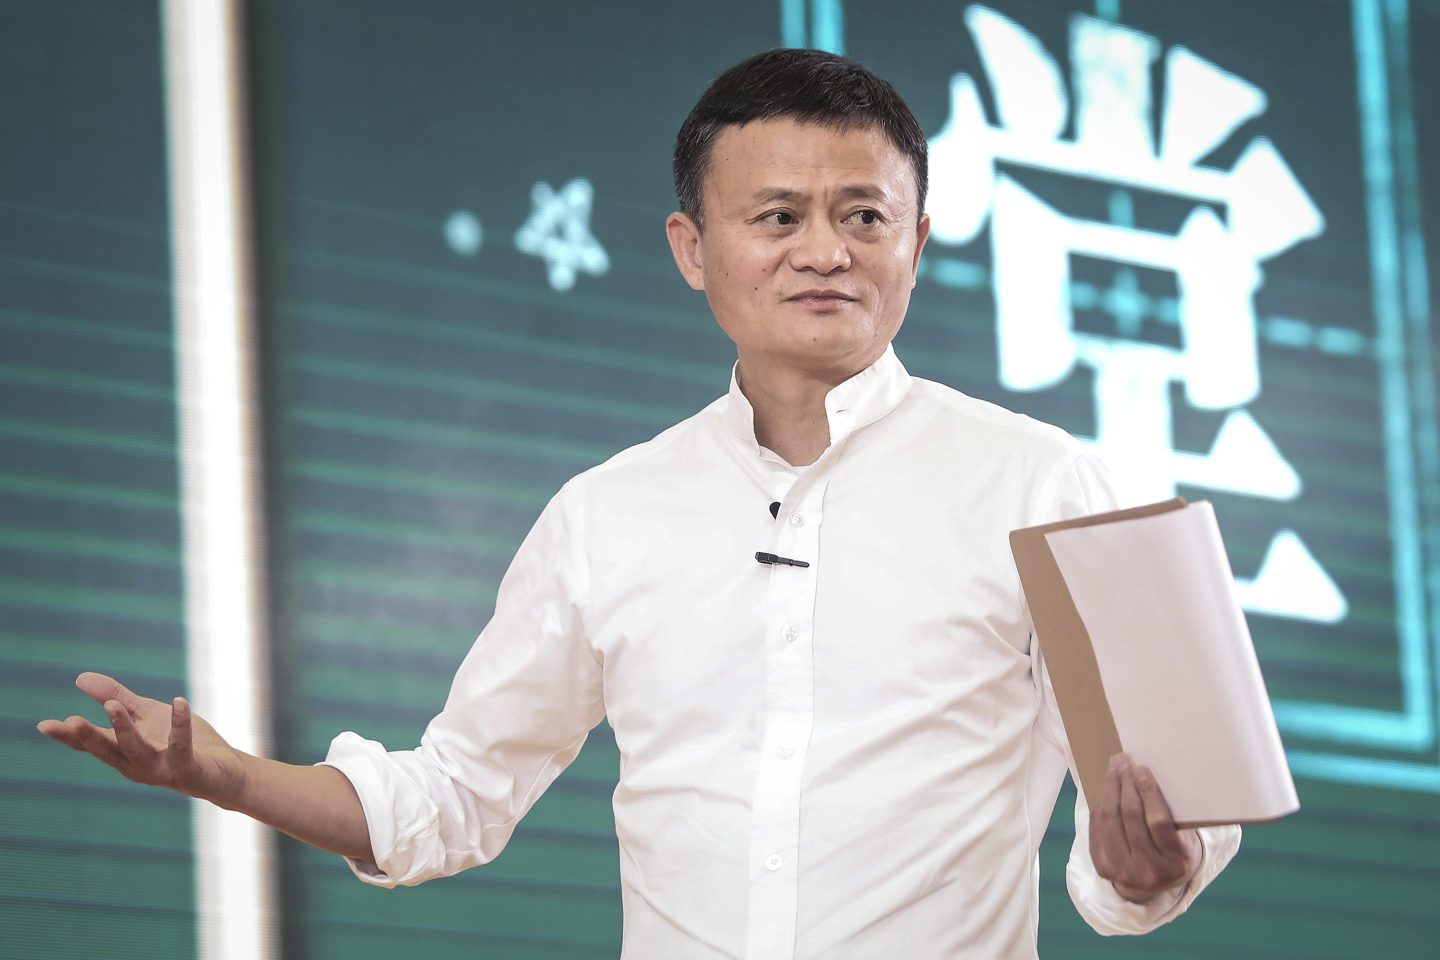 Founder of Alibaba Group Jack Ma gives a speech at the 'Ma Yun Rural Teachers and Headmasters Prize' on January 7th, 2020 in Sanya, Hainan province, China.